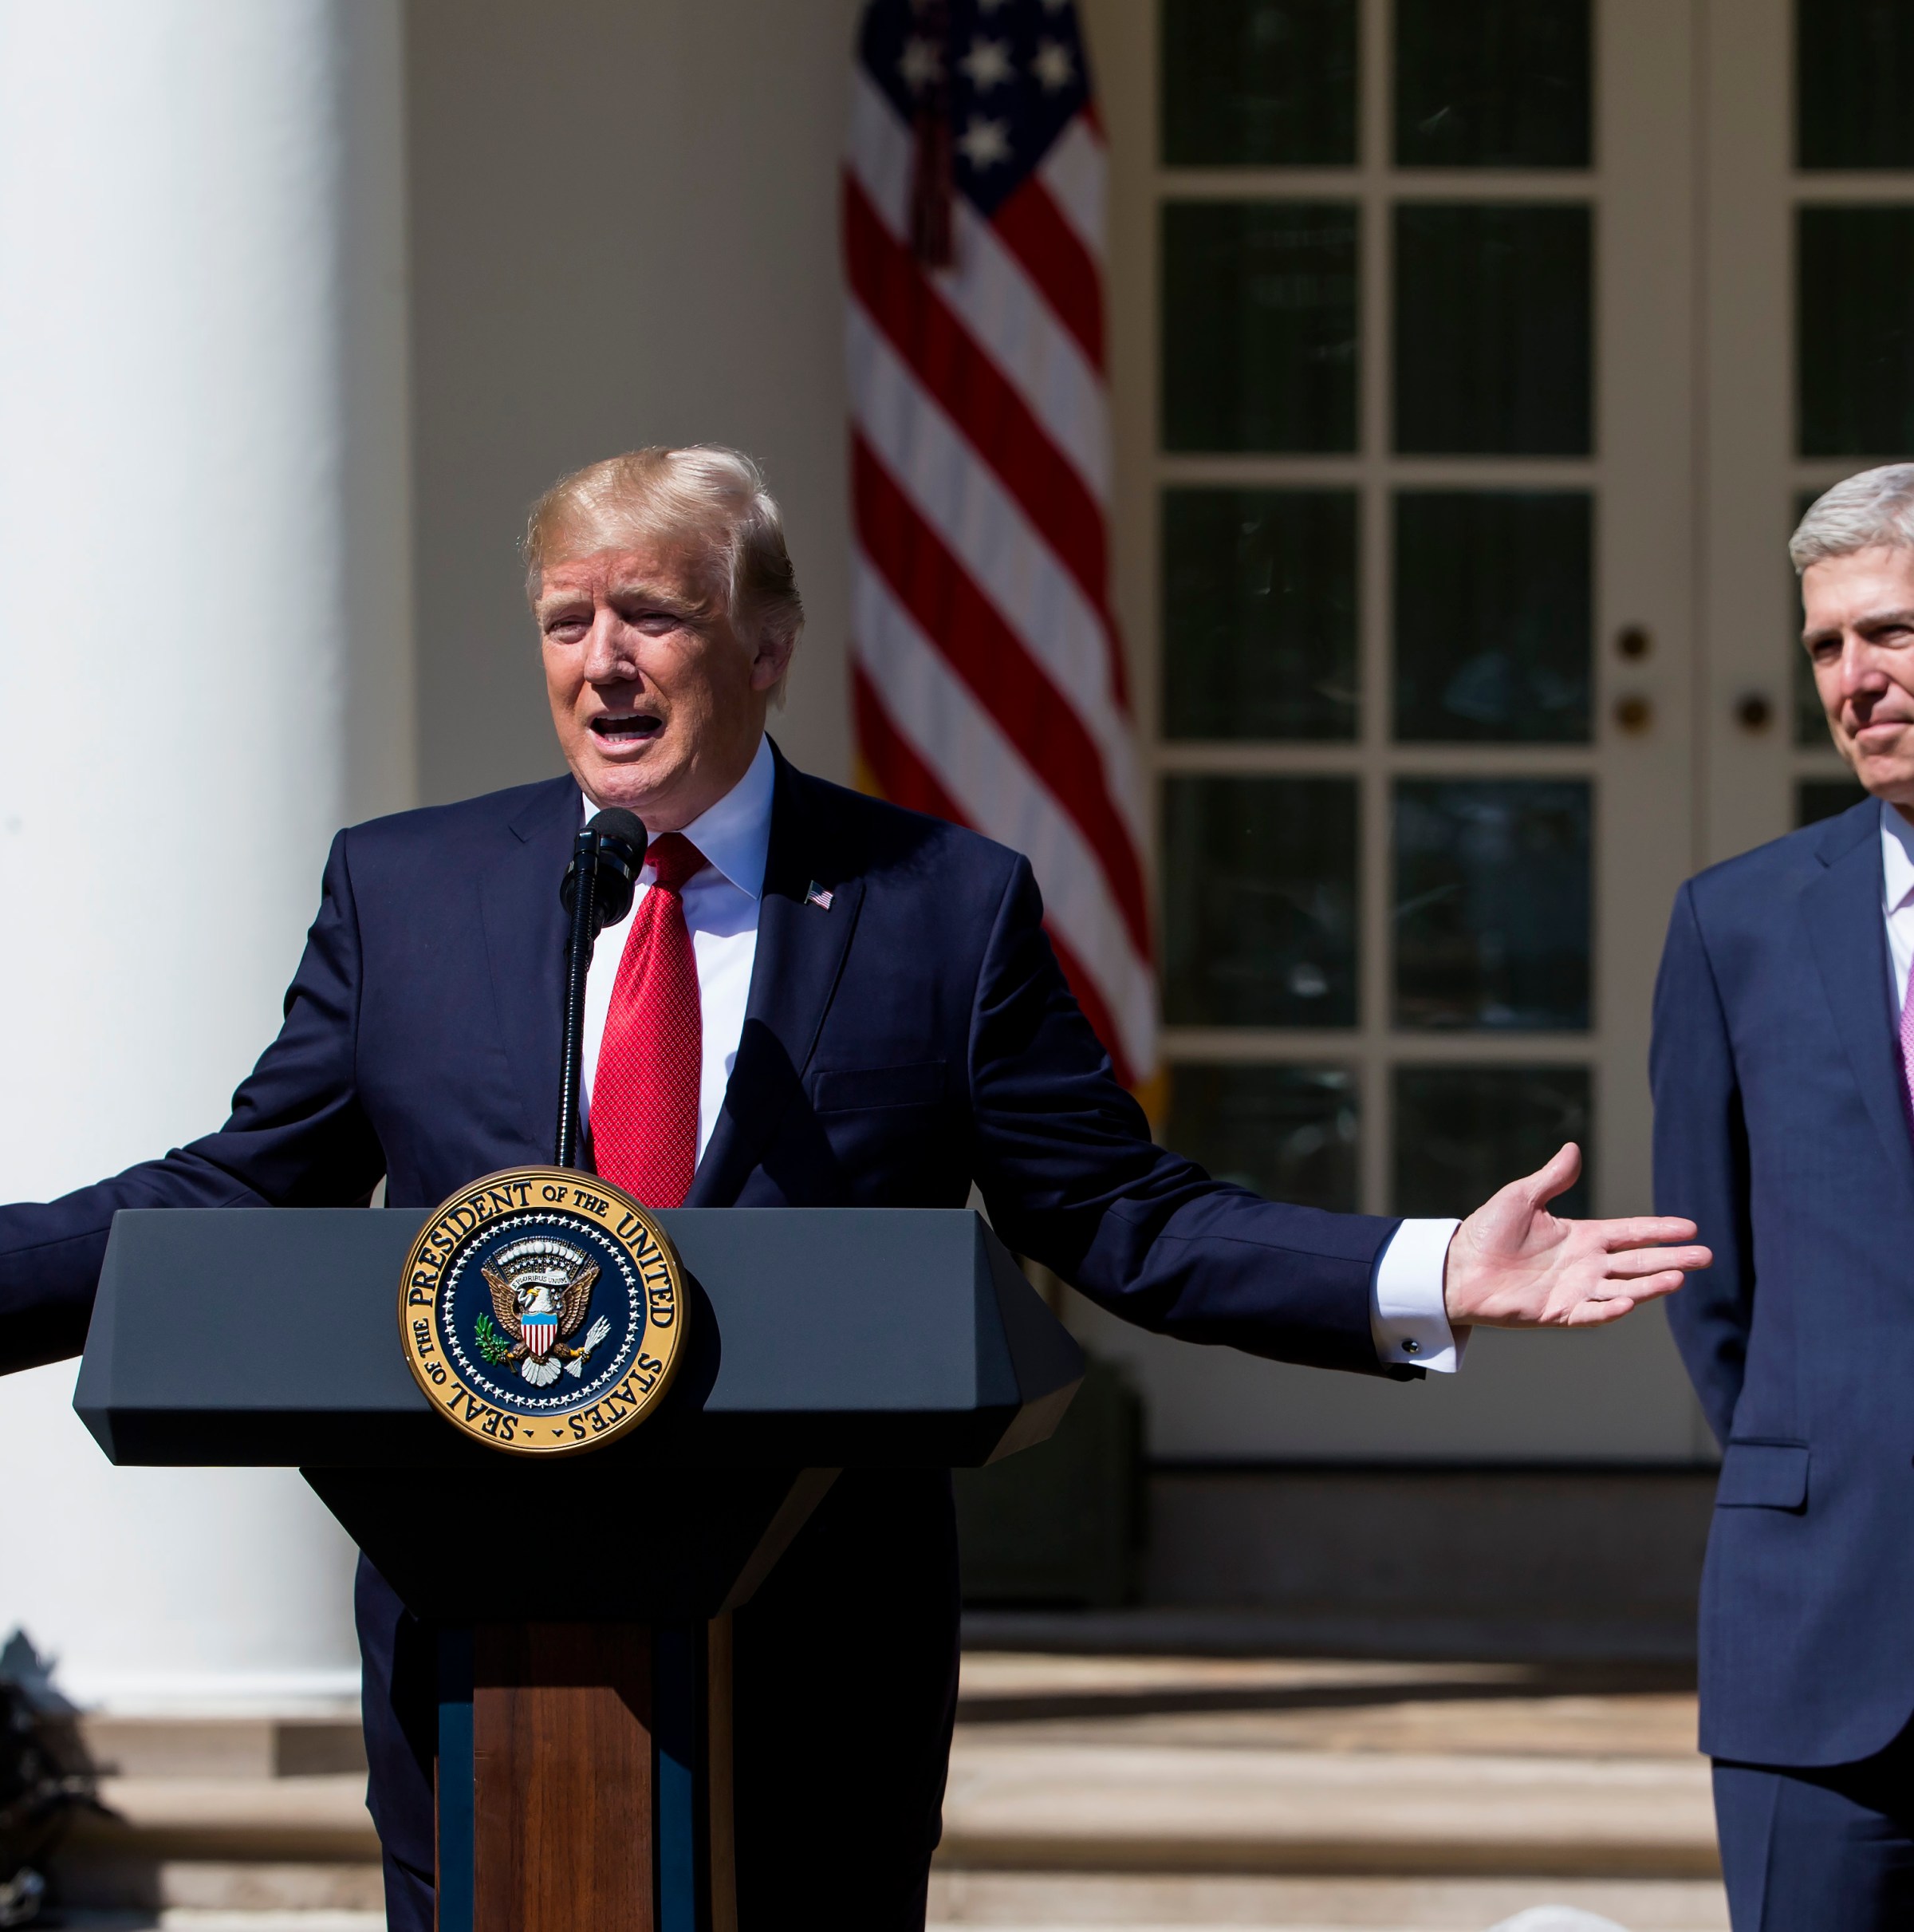 The Supreme Court just handed Trump an astonishing victory